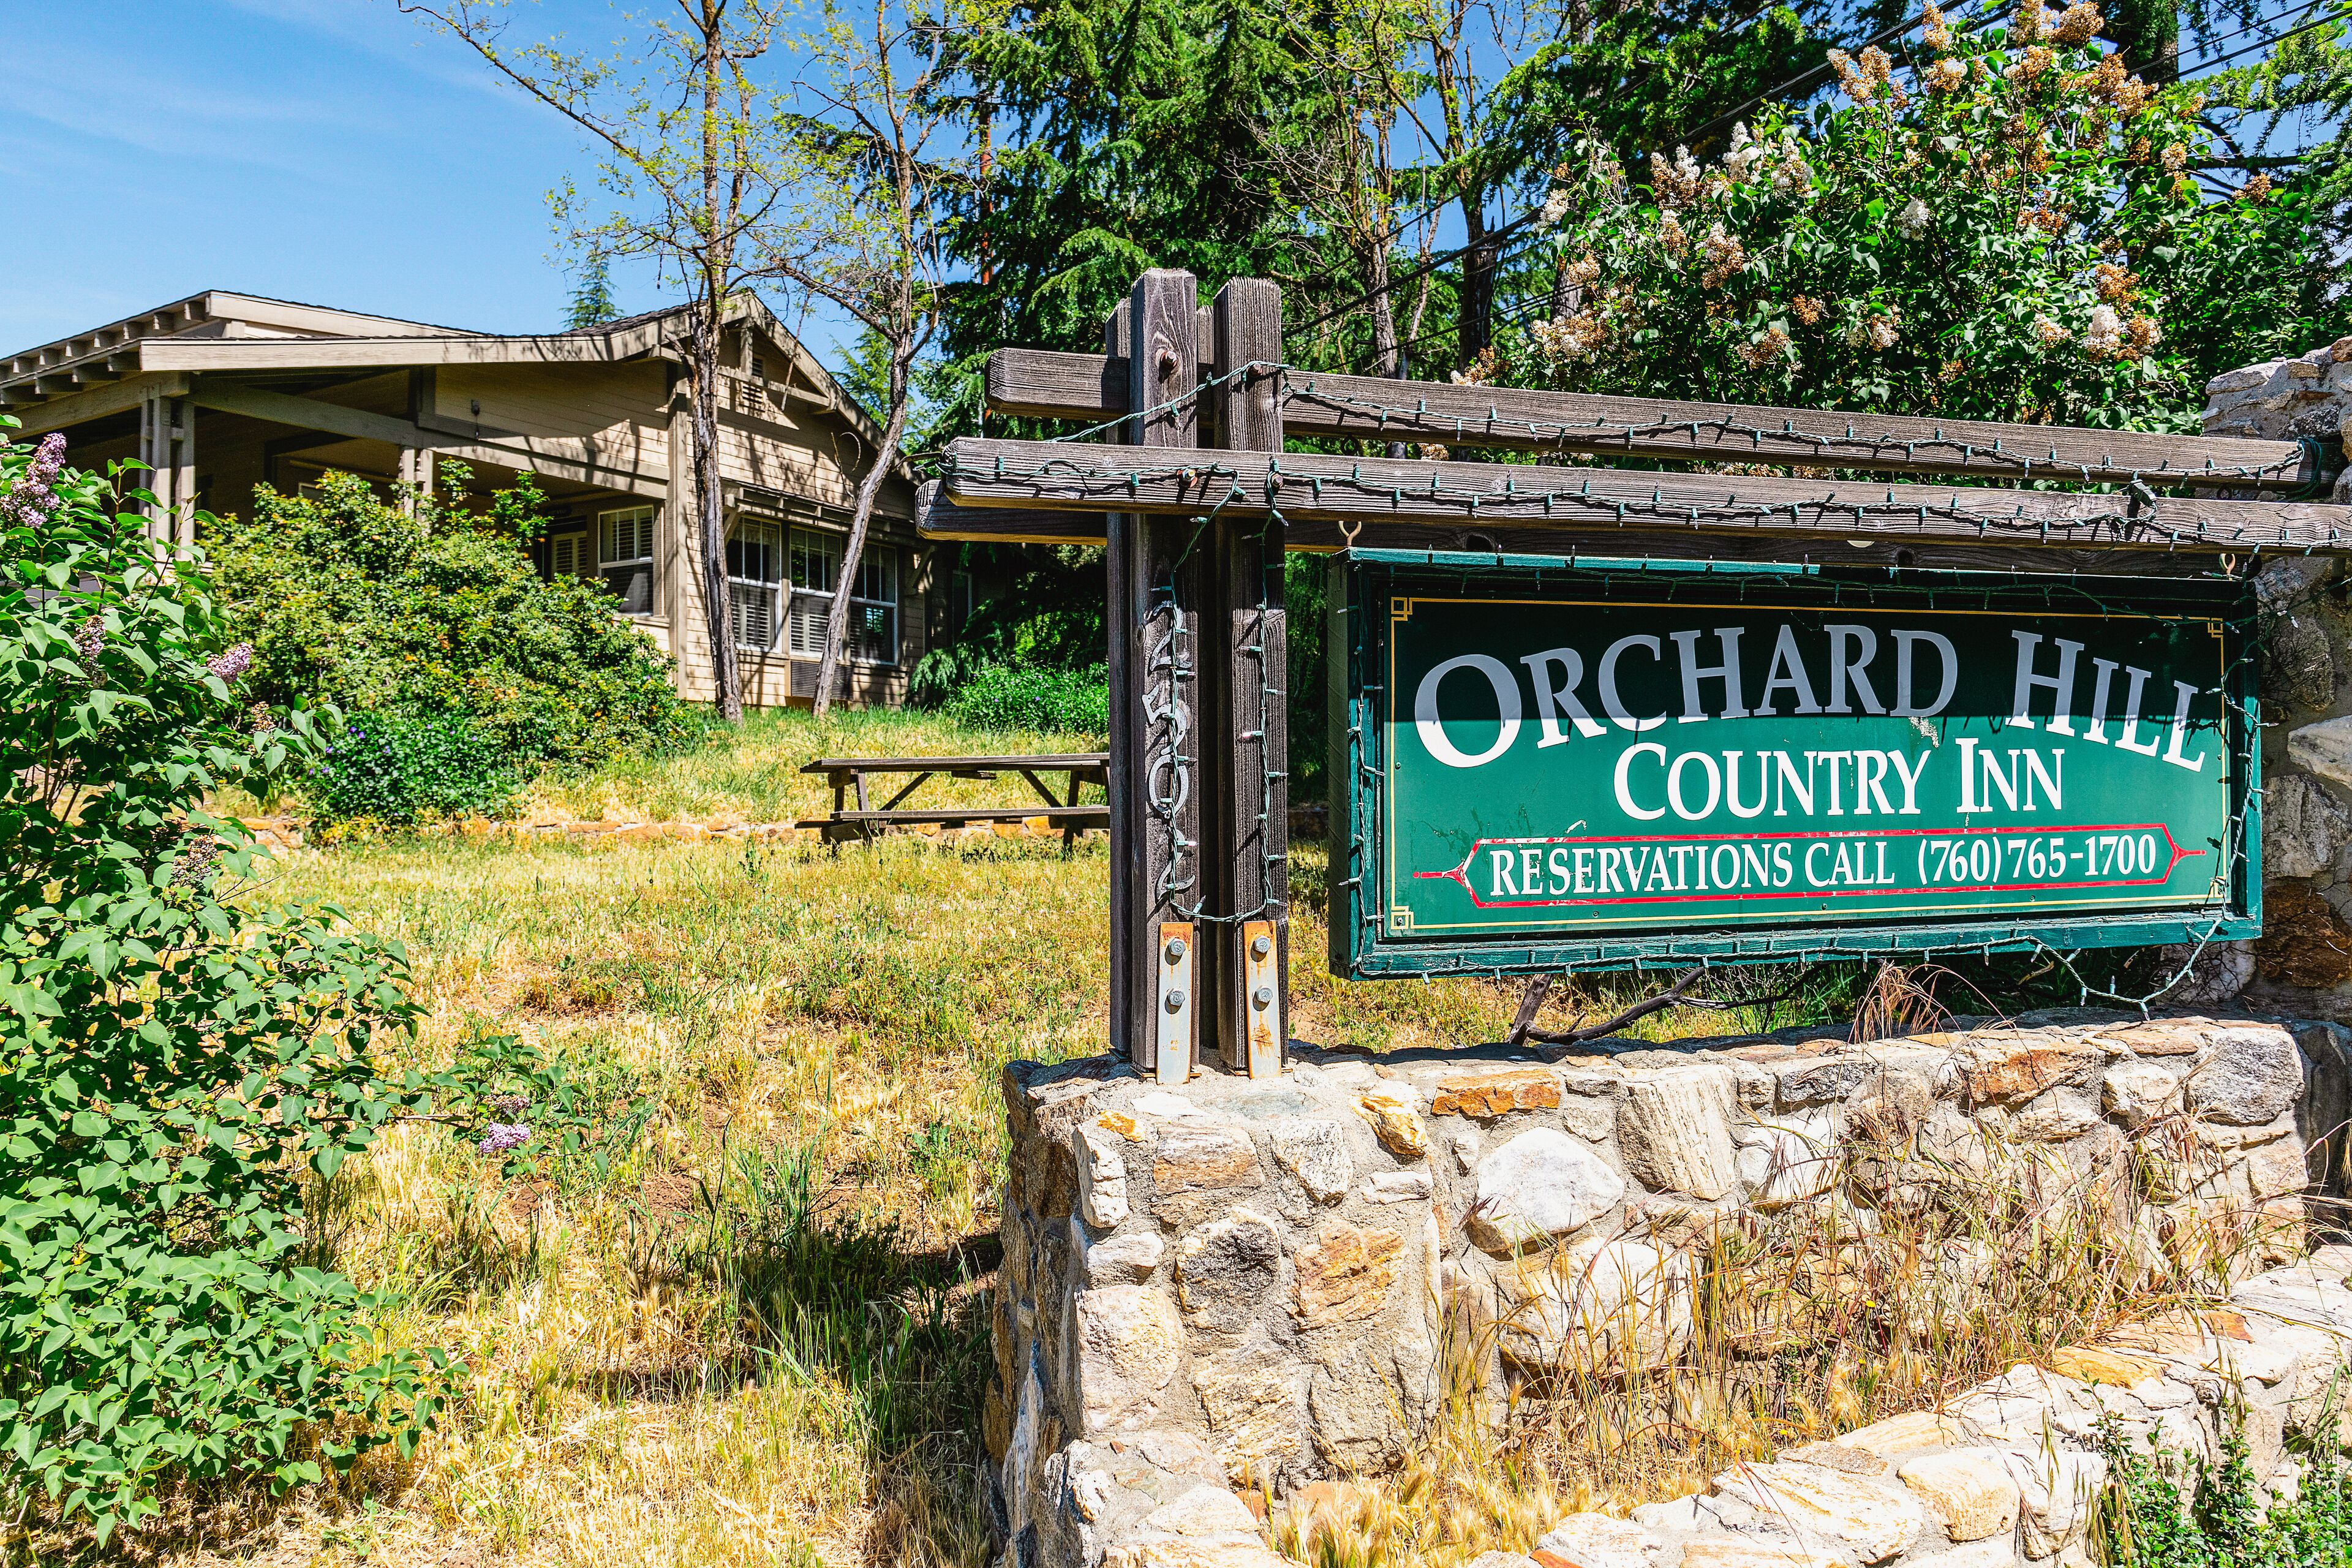 Orchard Hill